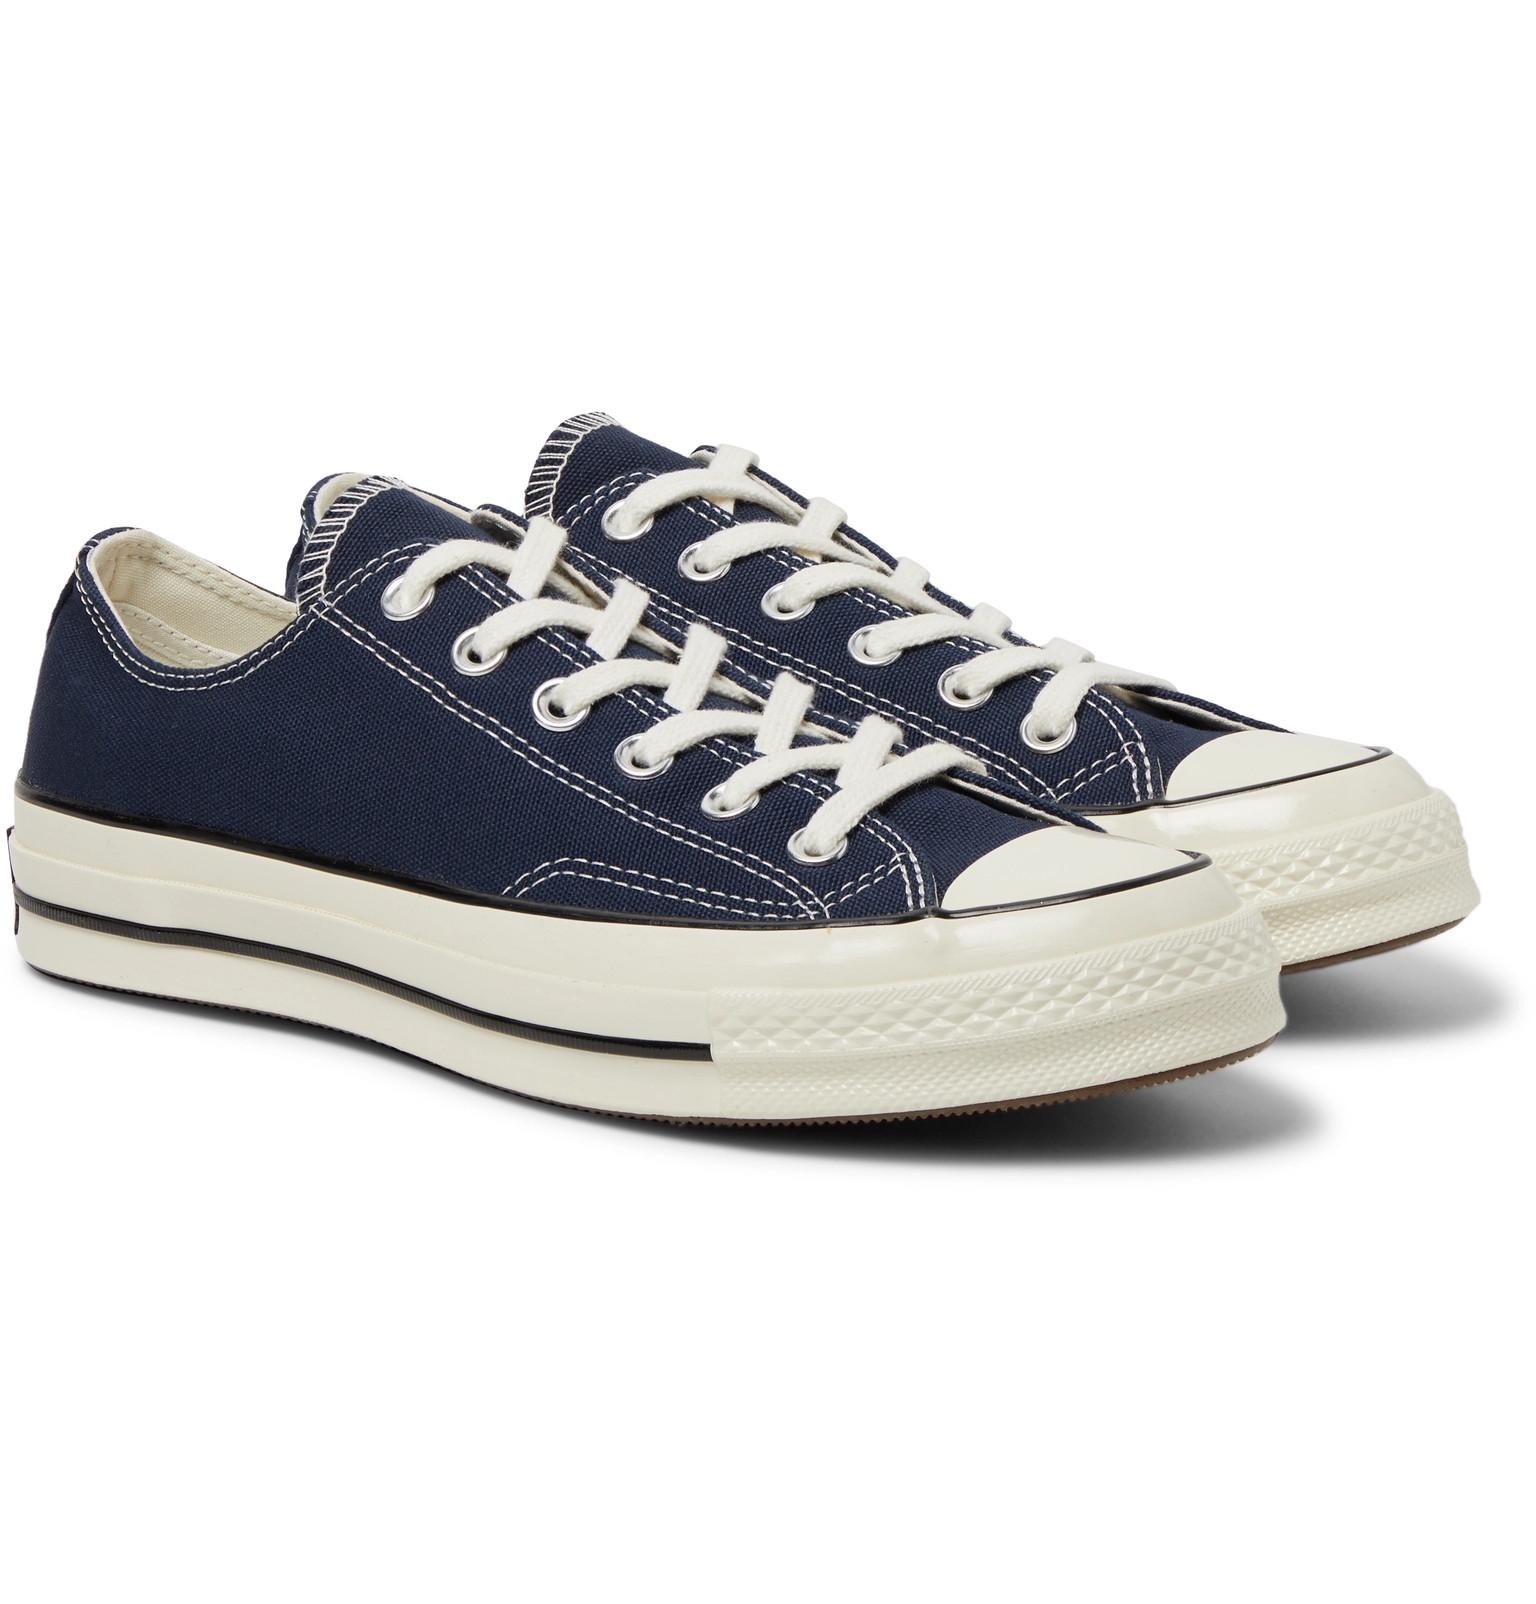 Converse Chuck 70 Canvas Sneakers in Blue for Men - Lyst